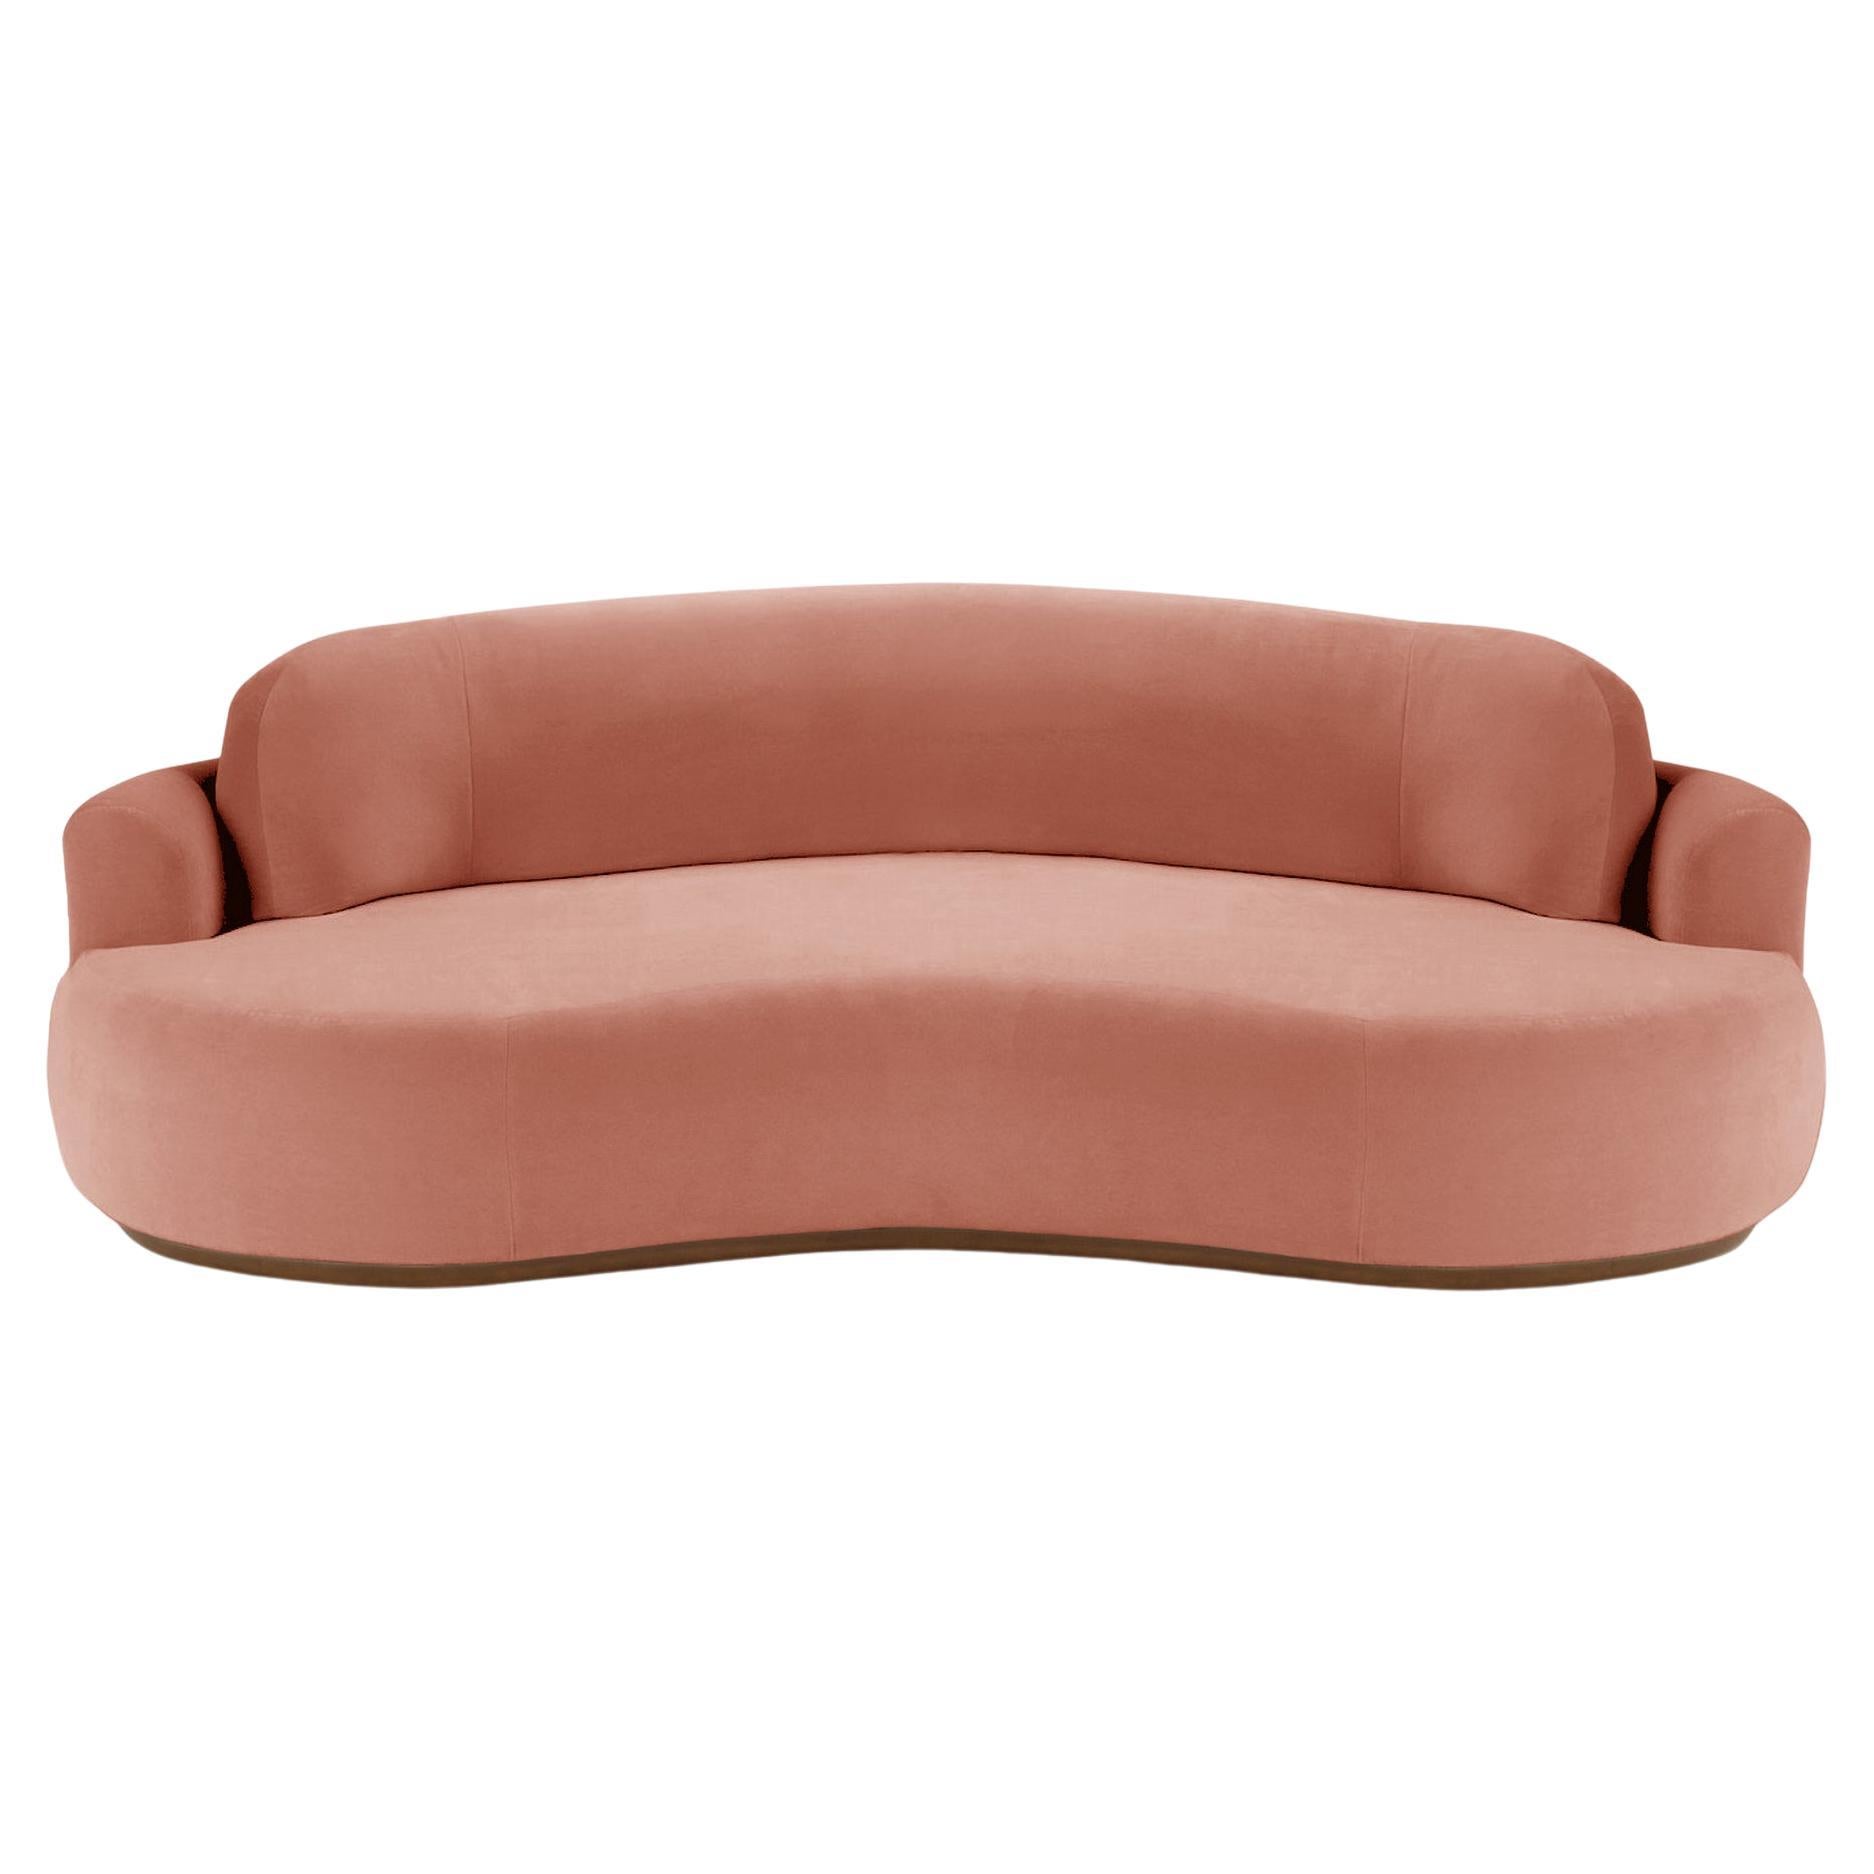 Naked Round Sofa, Large with Beech Ash-056-1 and Paris Brick For Sale